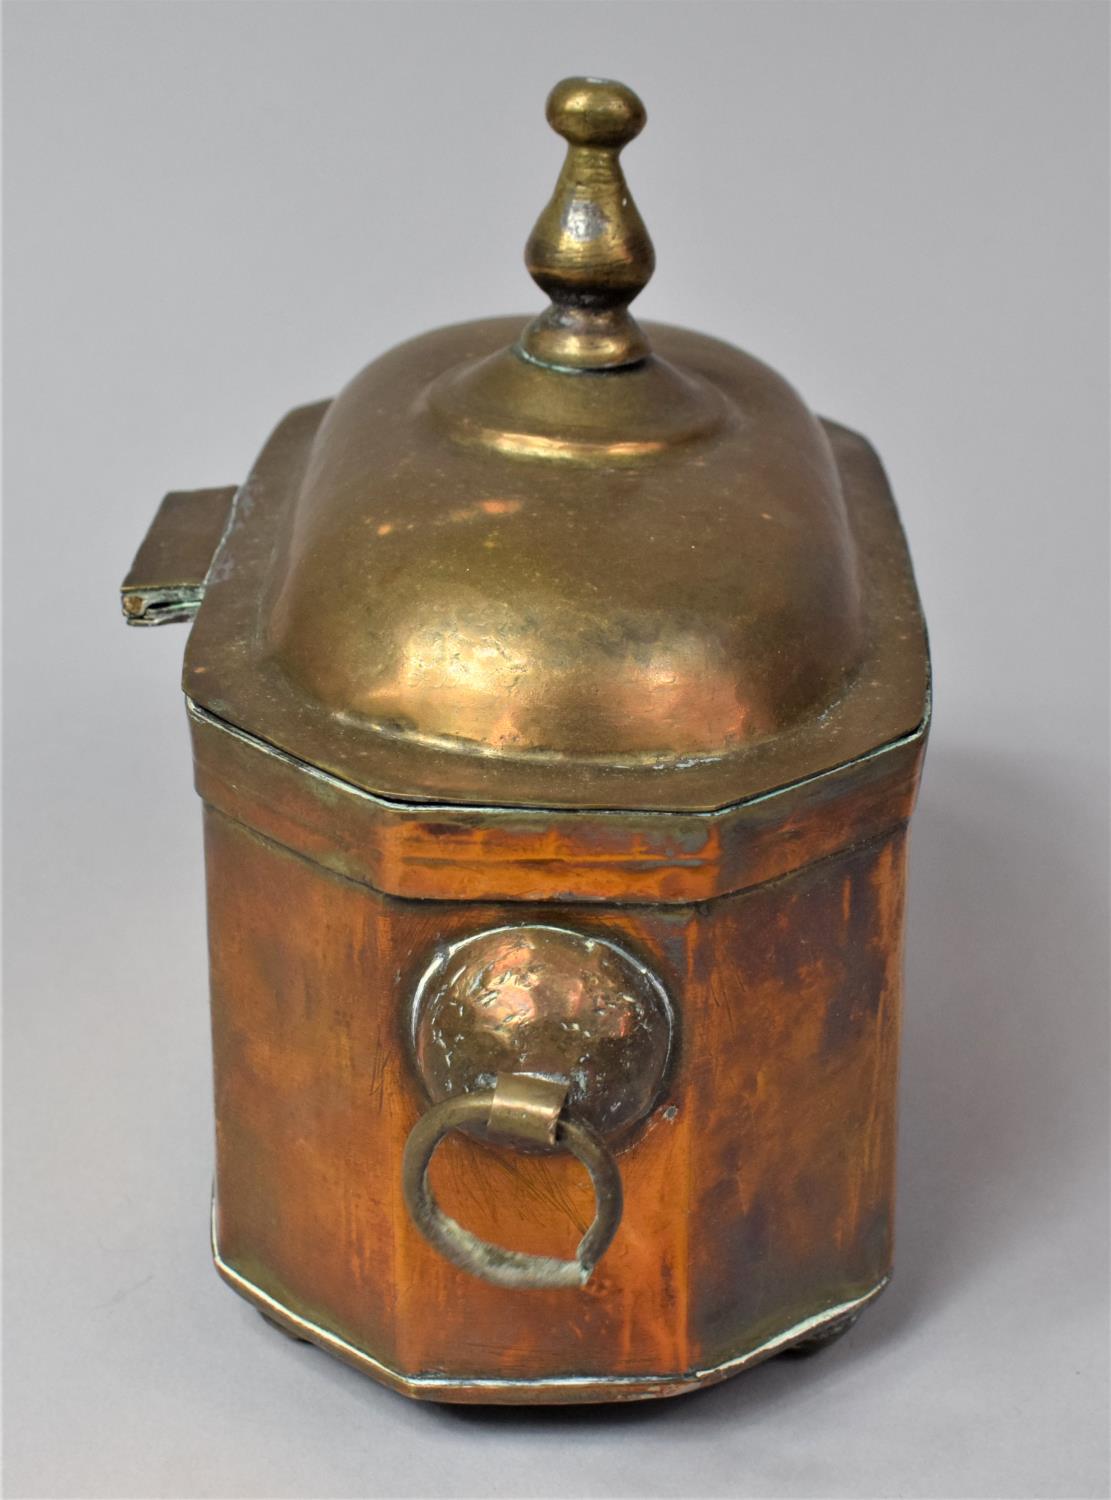 A Dutch Indonesian Colonial Brass Tea Caddy of Sarcophagus Form, with Two Ring Handles and Hinged - Image 4 of 8